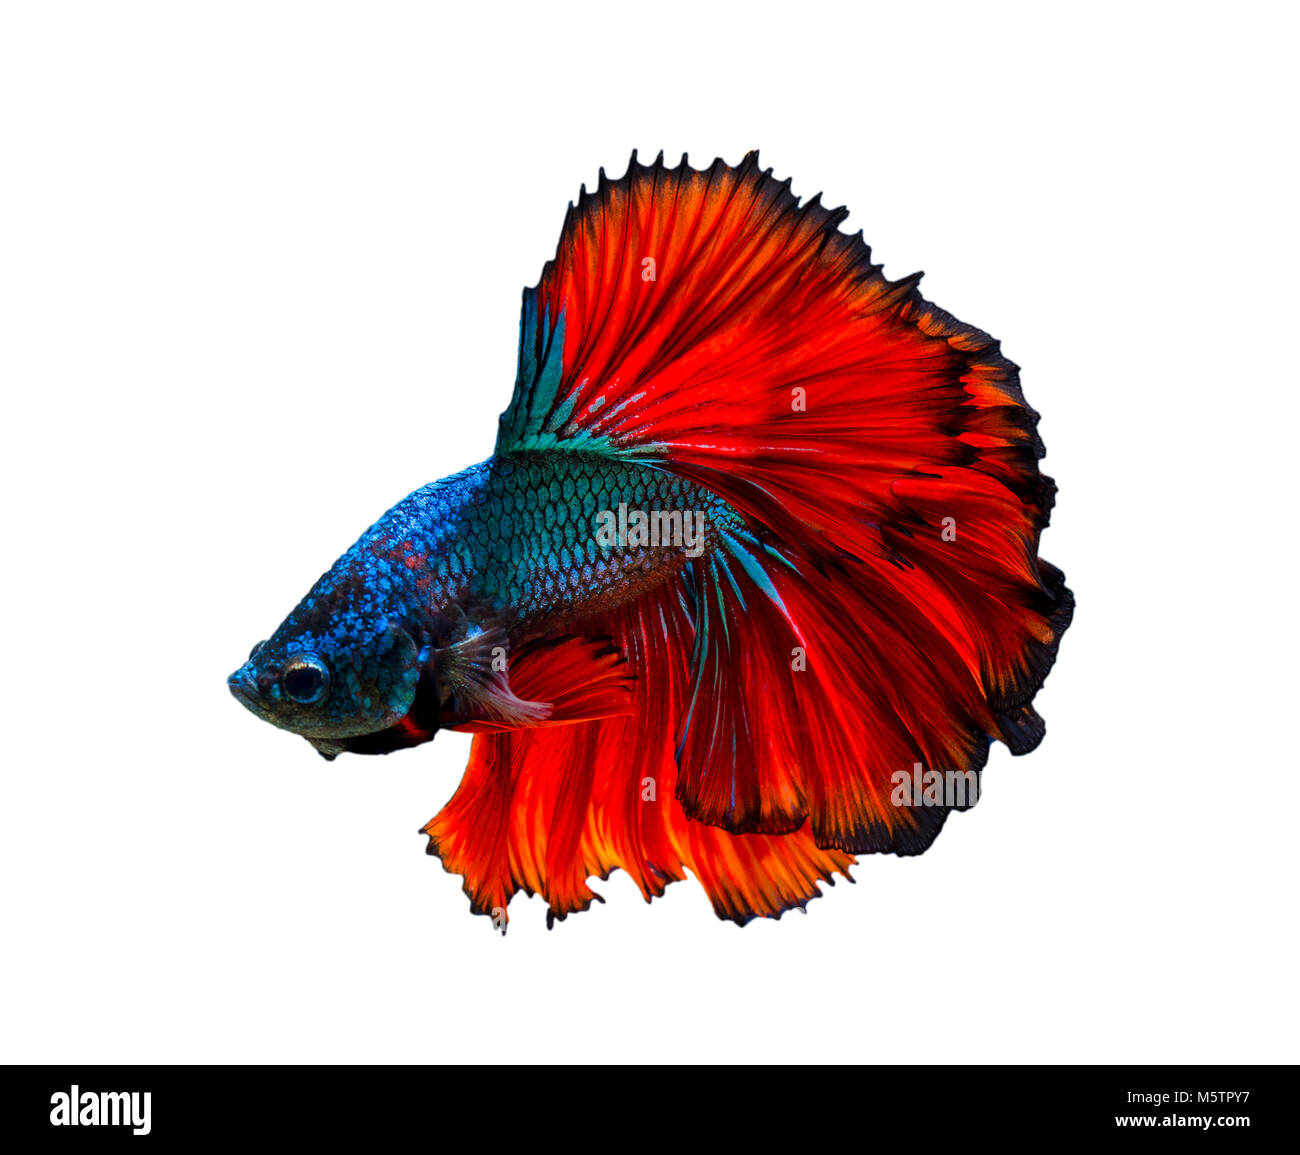 Fighting fish Red blue White background Isolate Stock Photo - Alamy